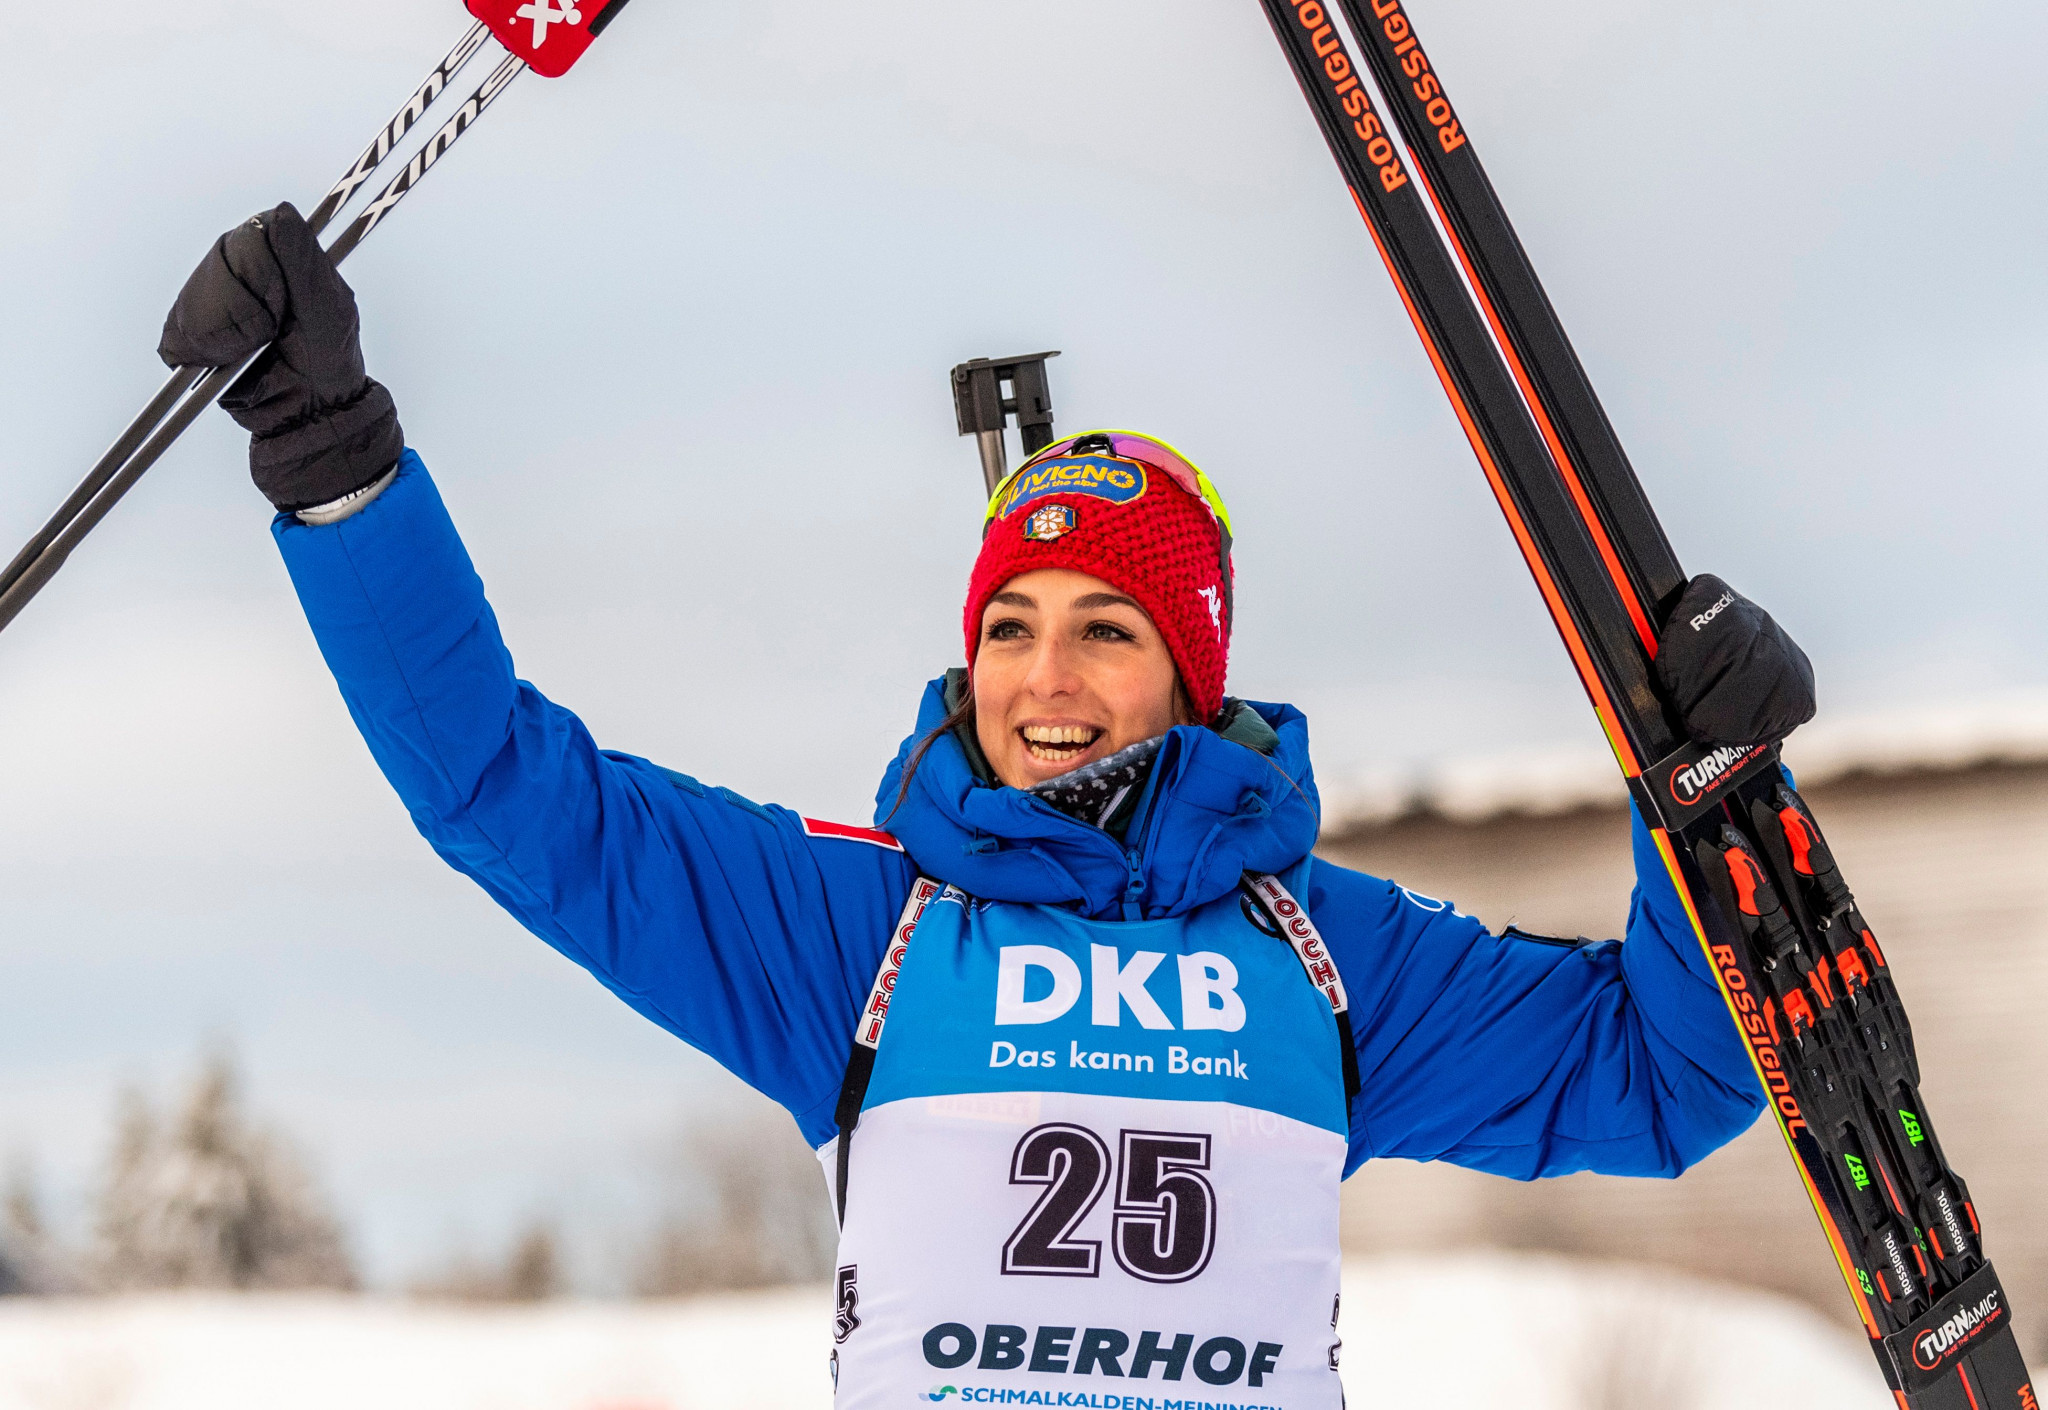 Lisa Vittozzi has claimed her first World Cup victory with a sprint win in Oberhof ©Getty Images